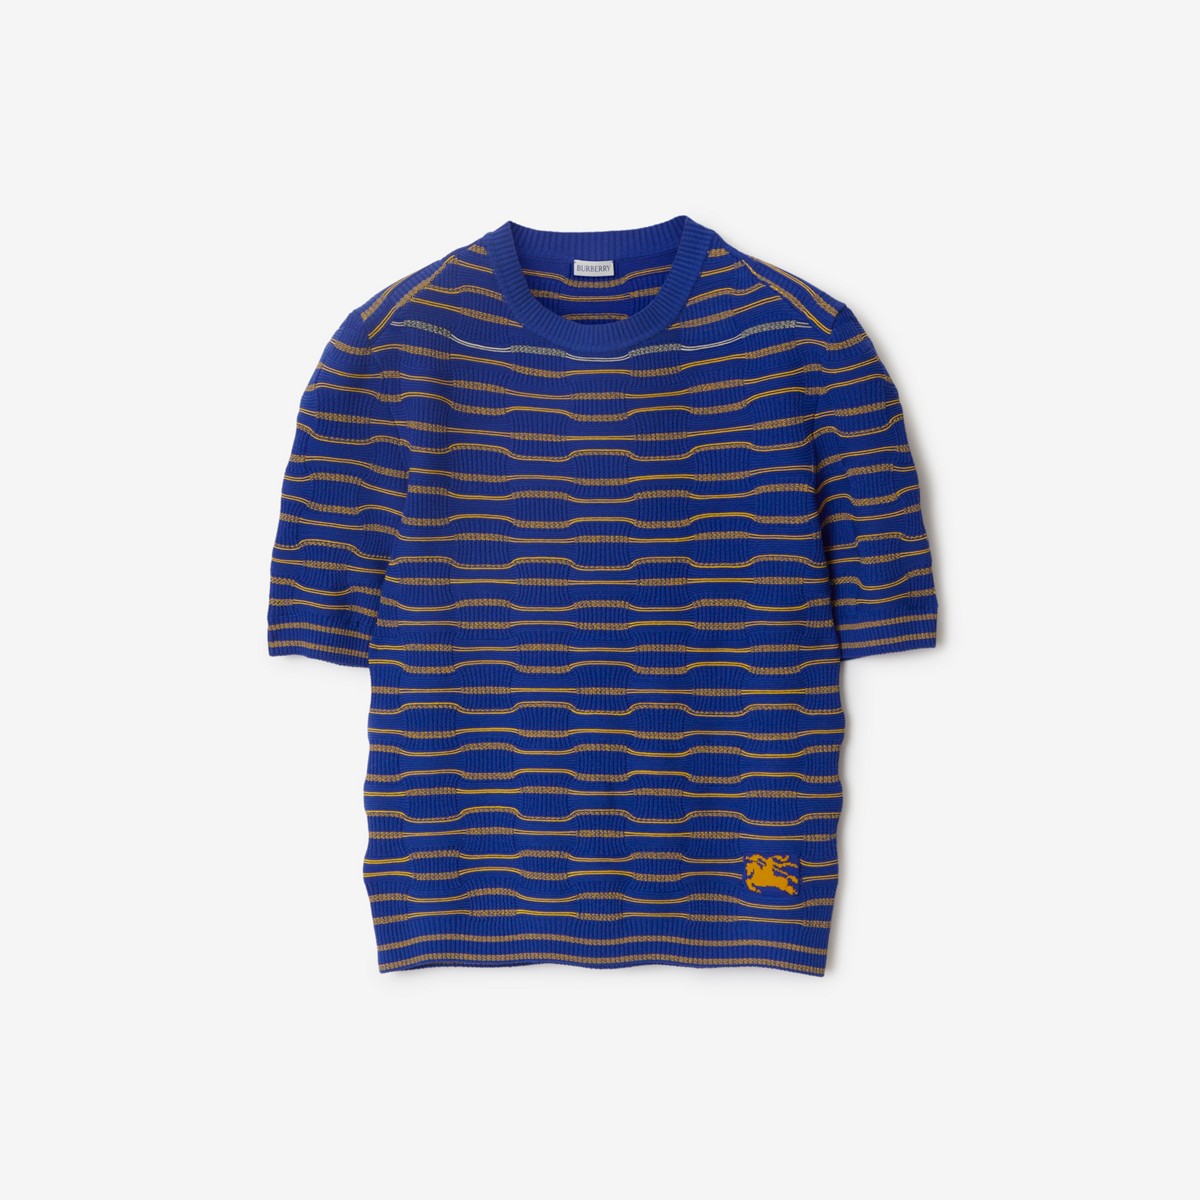 Burberry Striped Cotton Blend Top In Knight/sunflower